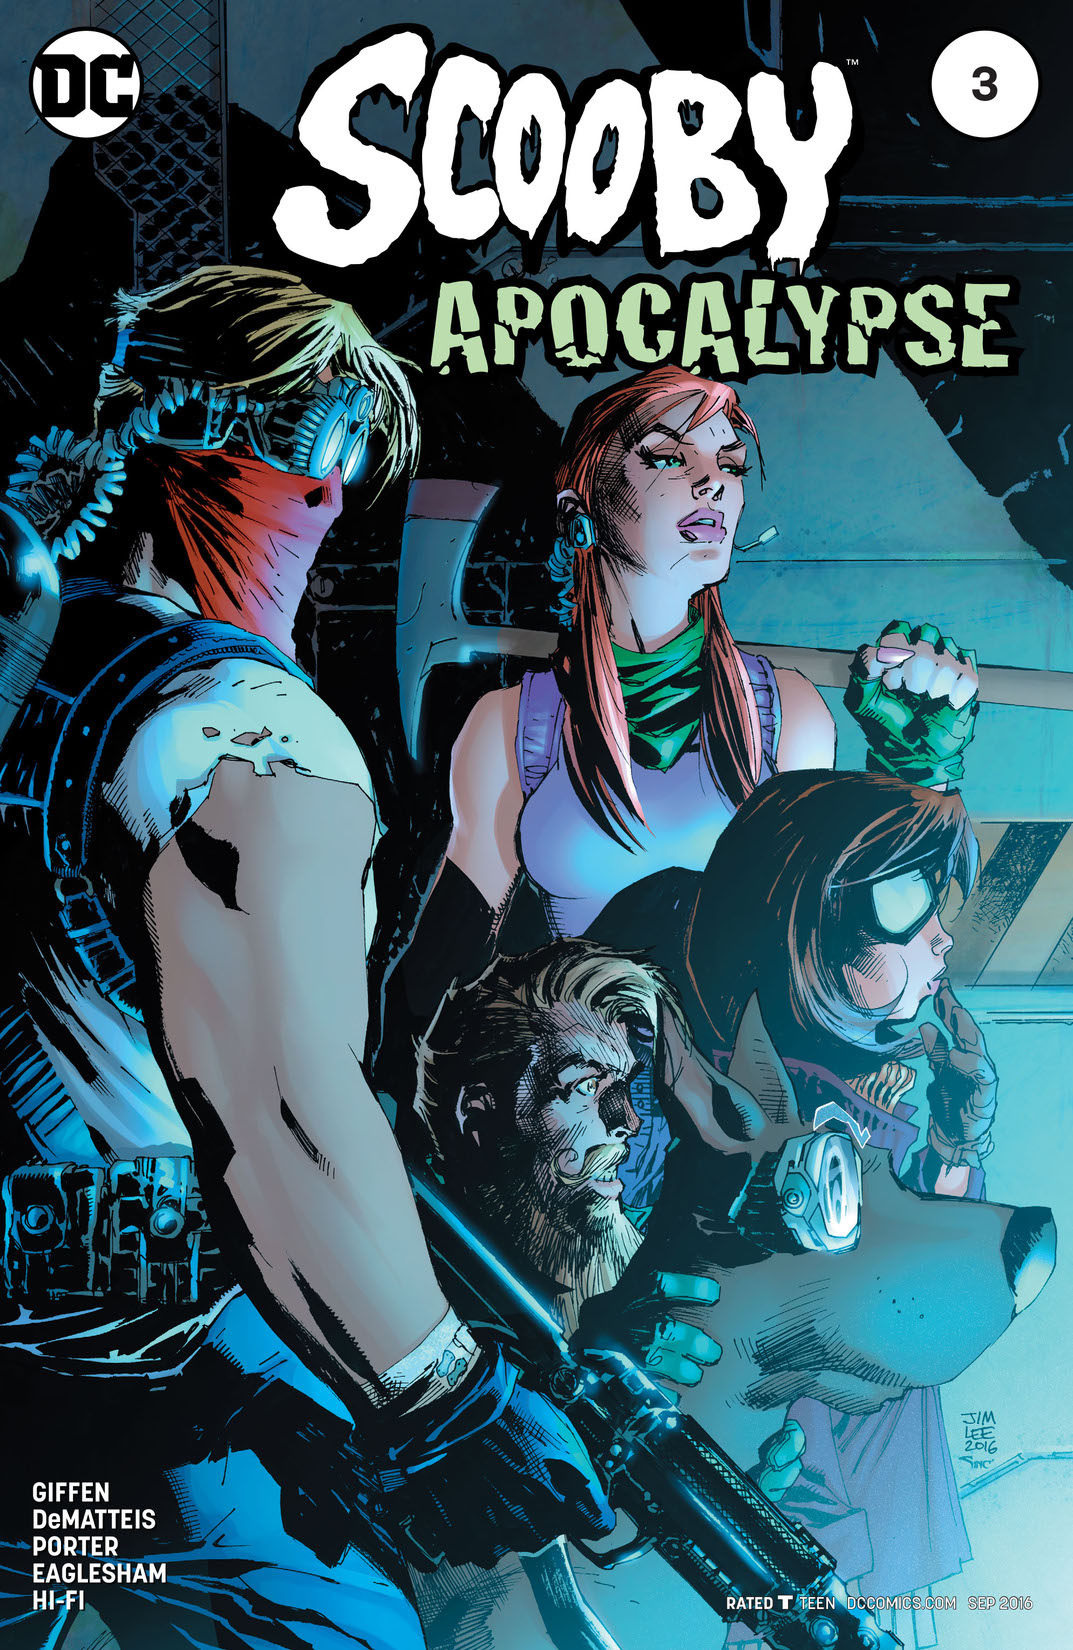 Scooby Apocalypse #3 preview images